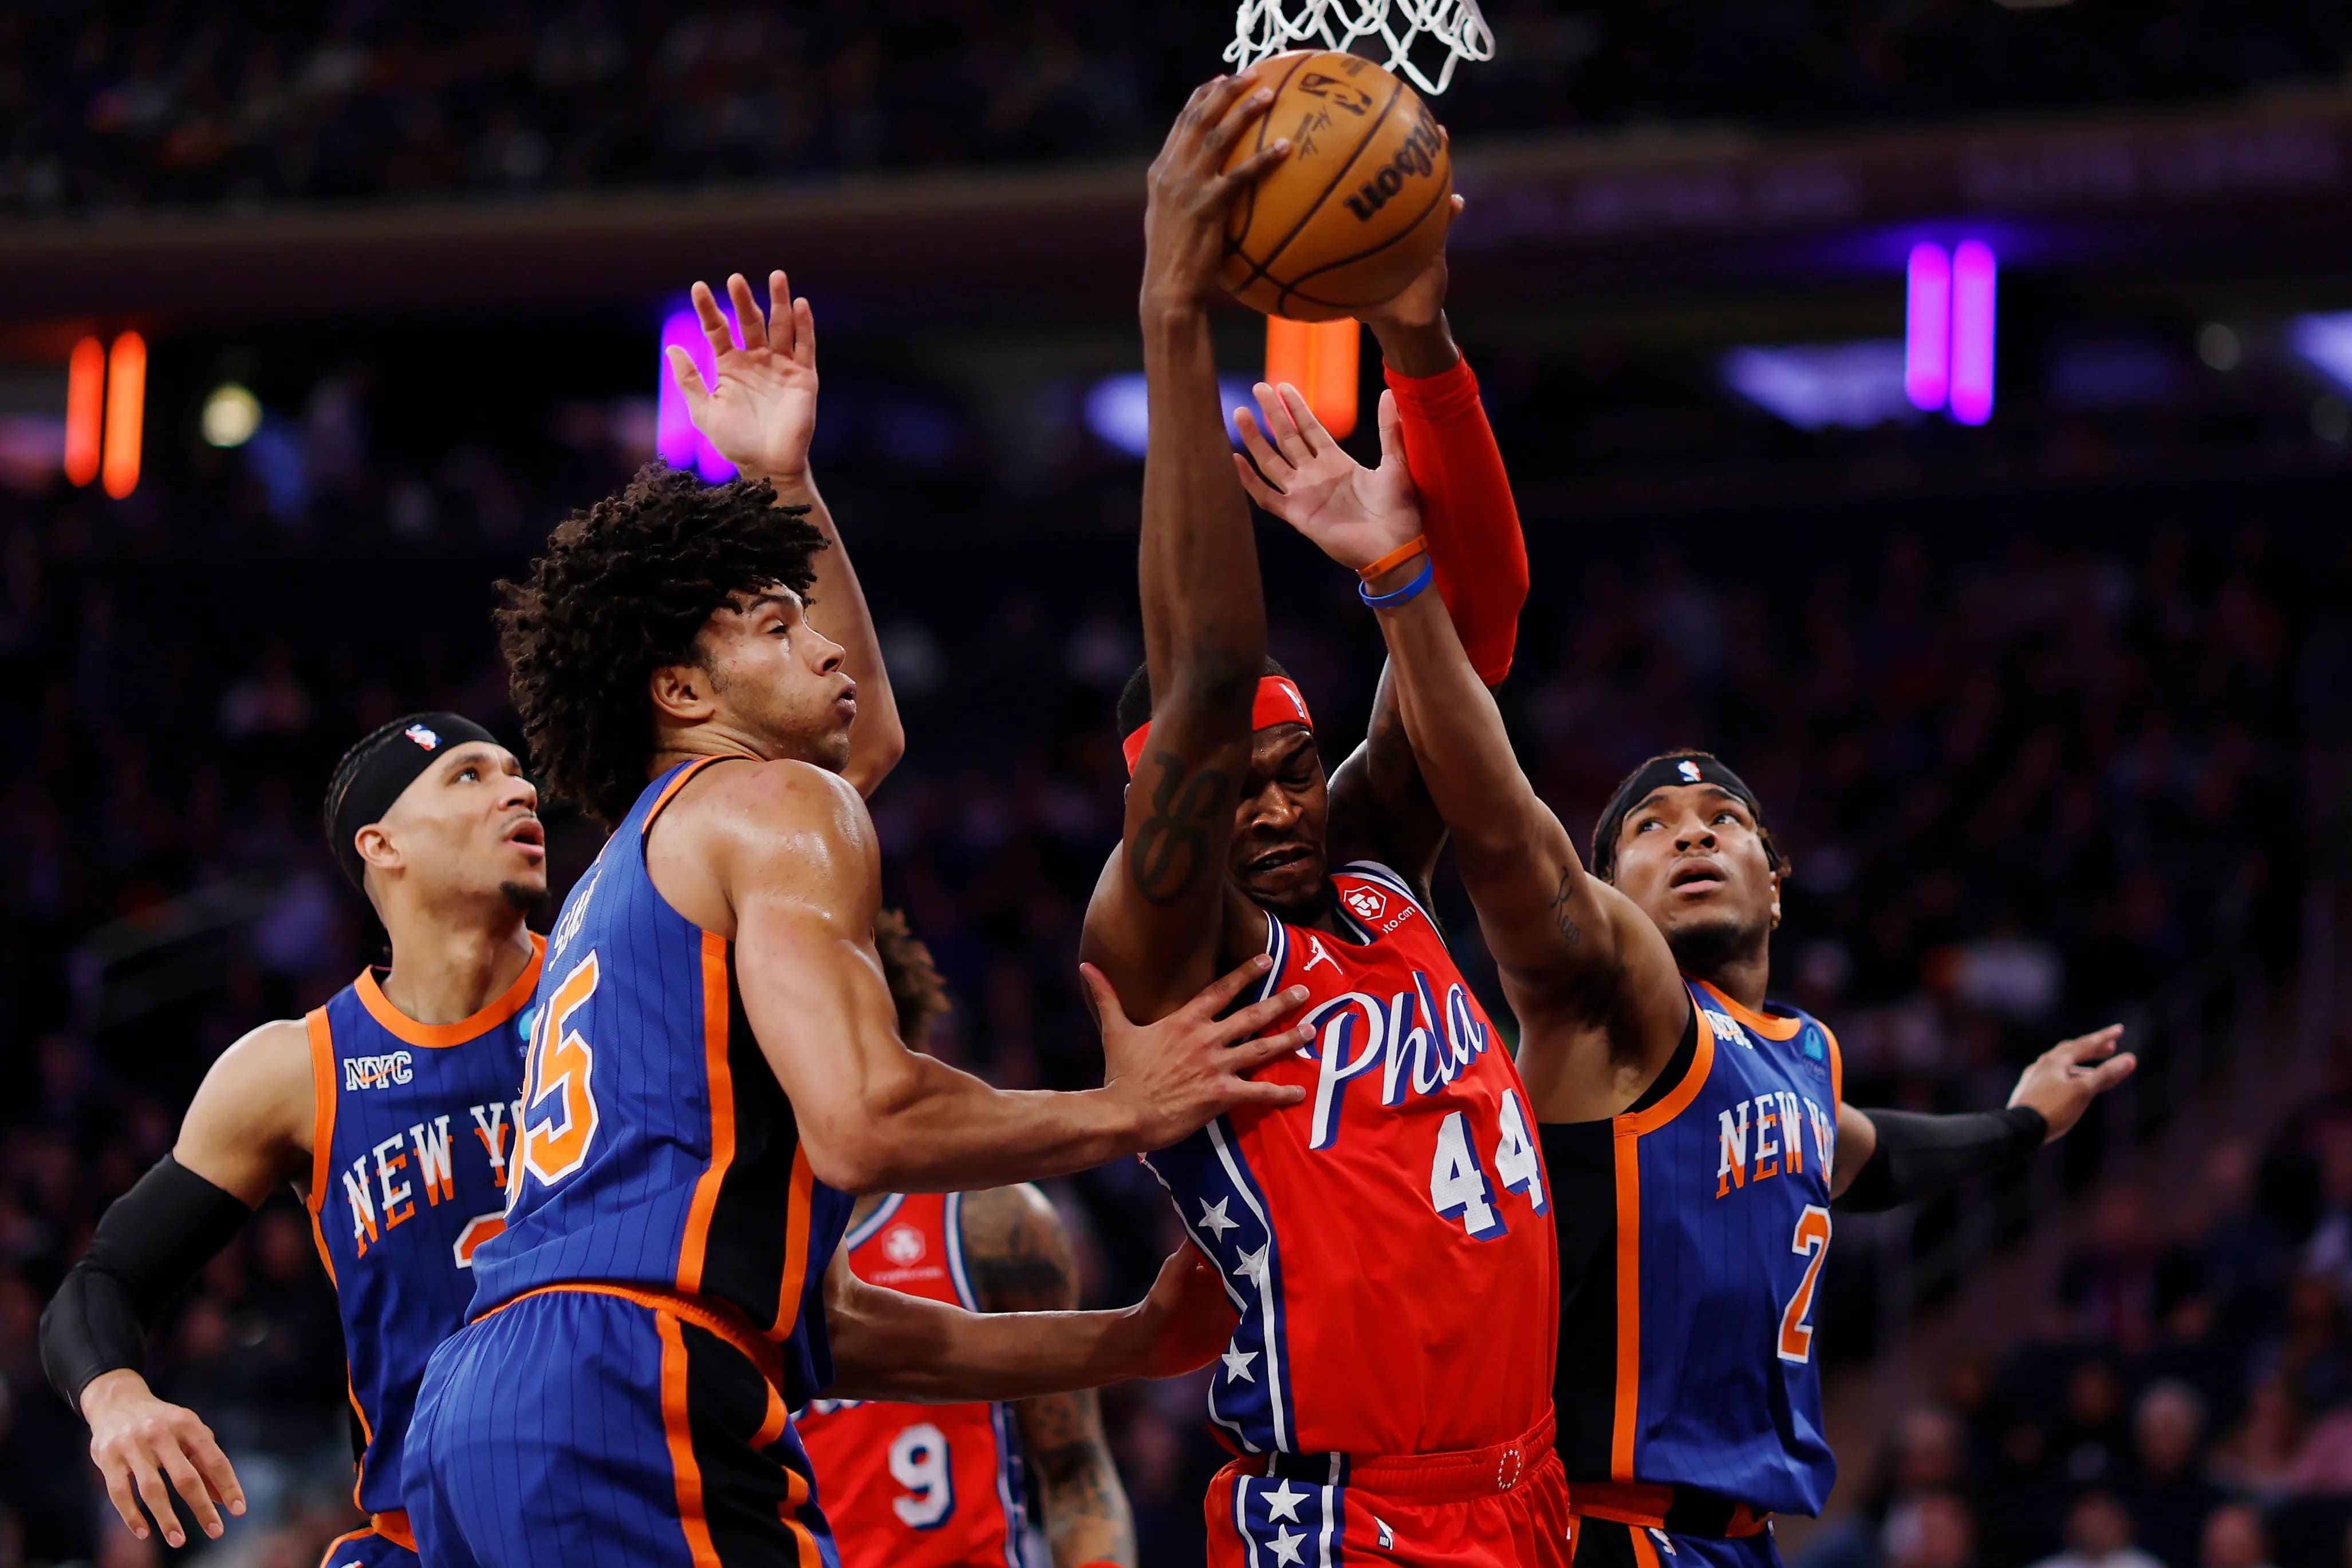 New York Knicks vs. Philadelphia 76ers: Preview, Where to Watch and Betting Odds